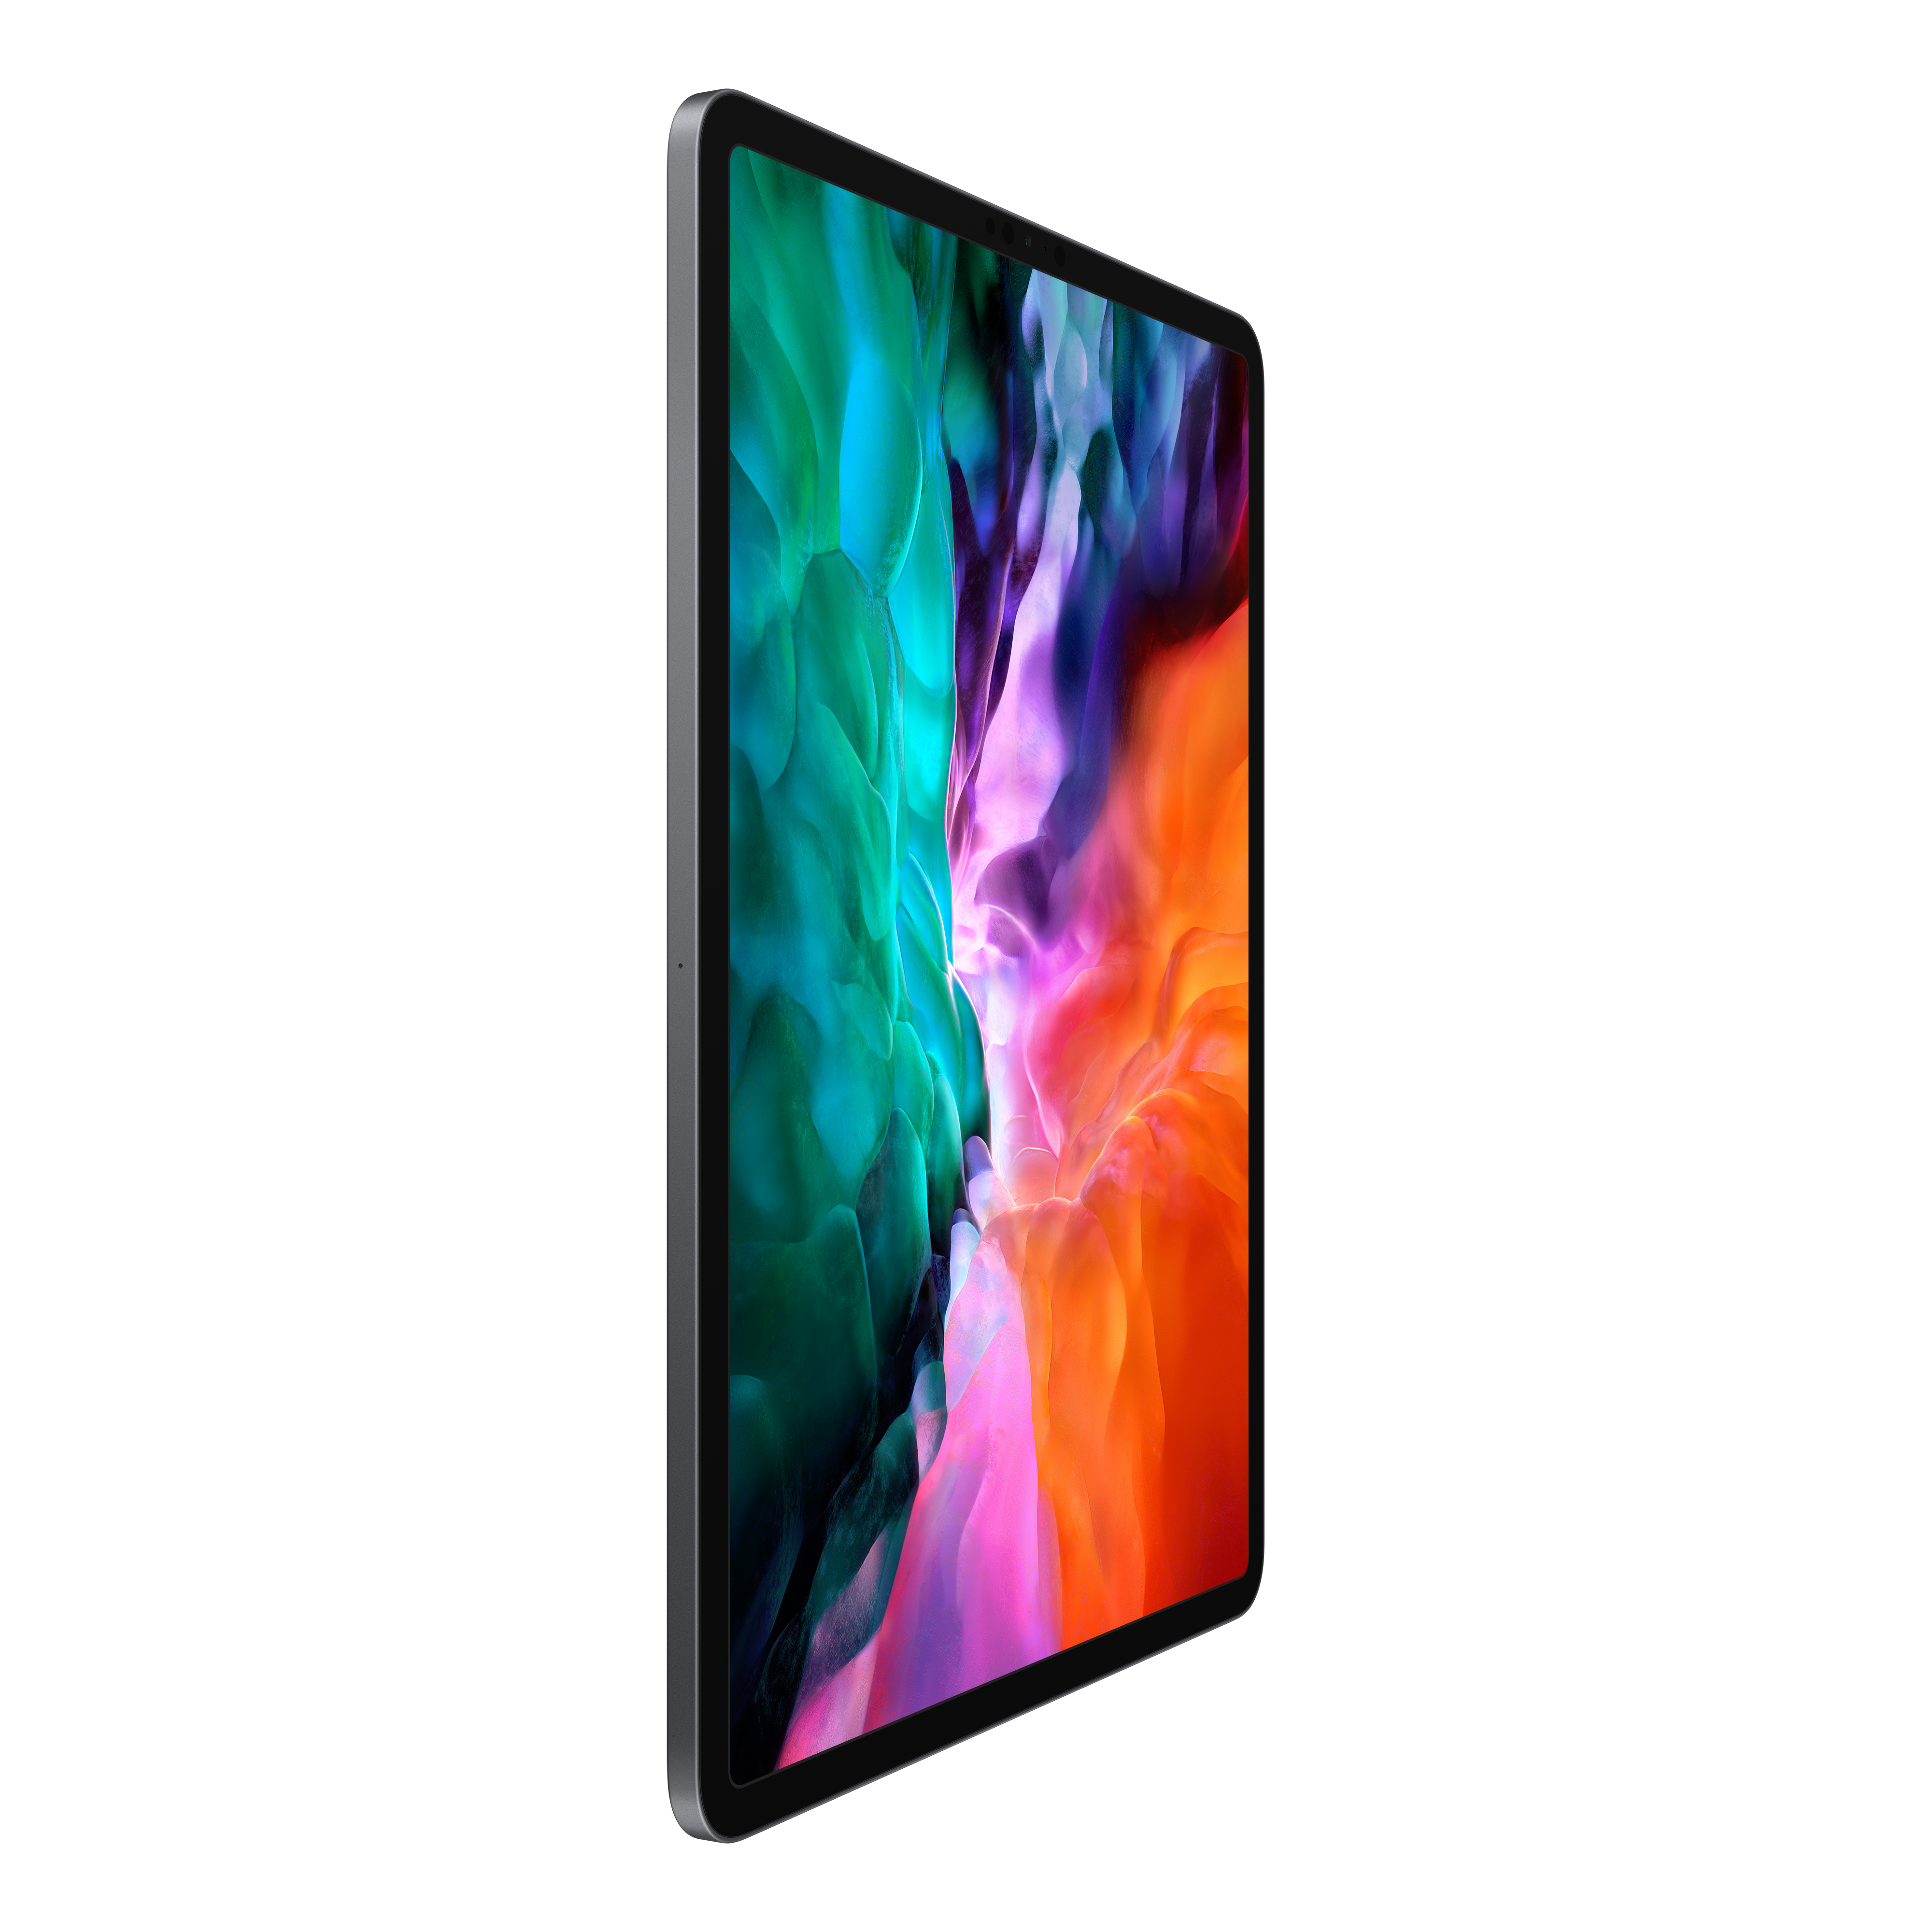 Apple 12.9-inch iPad Pro (2020) Wi-Fi + Cellular 512GB - Space Gray - image 1 of 10